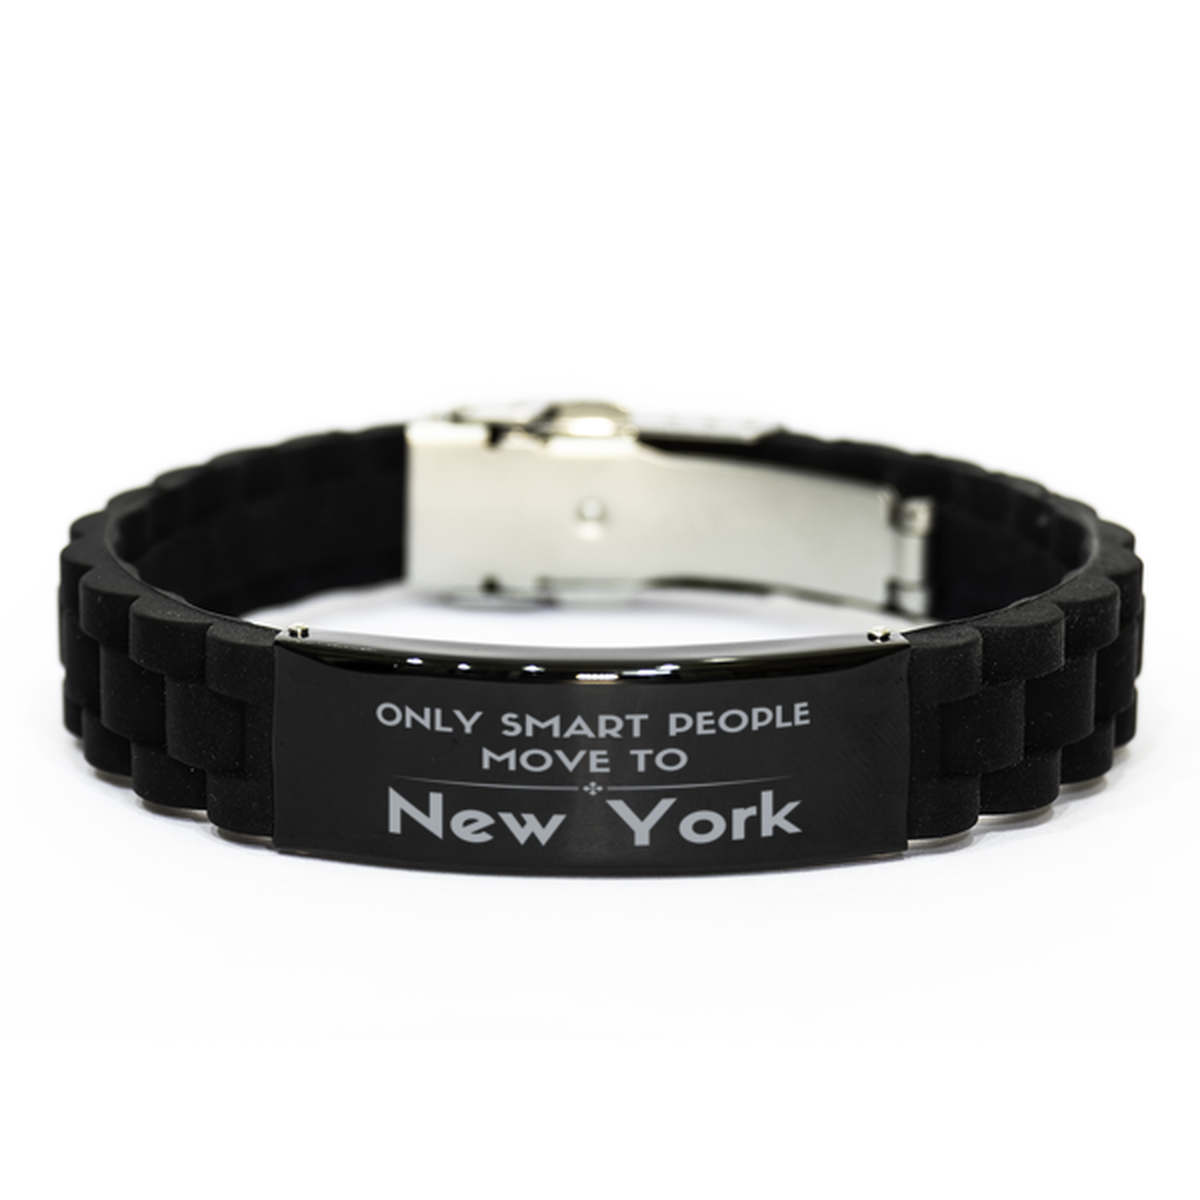 Only smart people move to New York Black Glidelock Clasp Bracelet, Gag Gifts For New York, Move to New York Gifts for Friends Coworker Funny Saying Quote